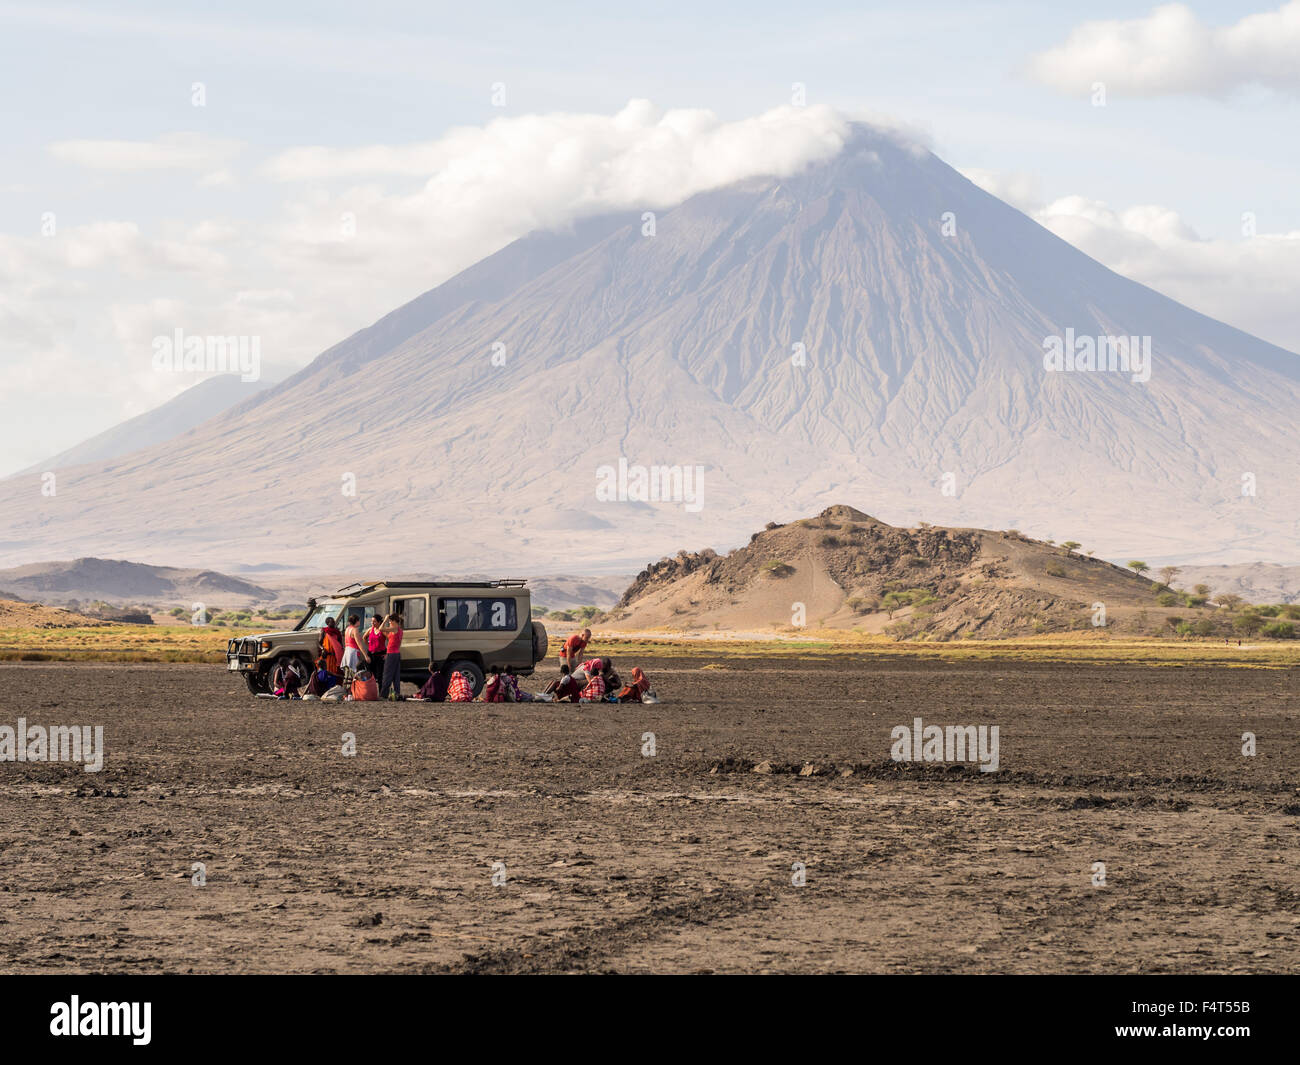 Maasai people sell their products to a tourist group in the dry part of Lake Natron. Ol Doinyo Lengai volcano in the background Stock Photo